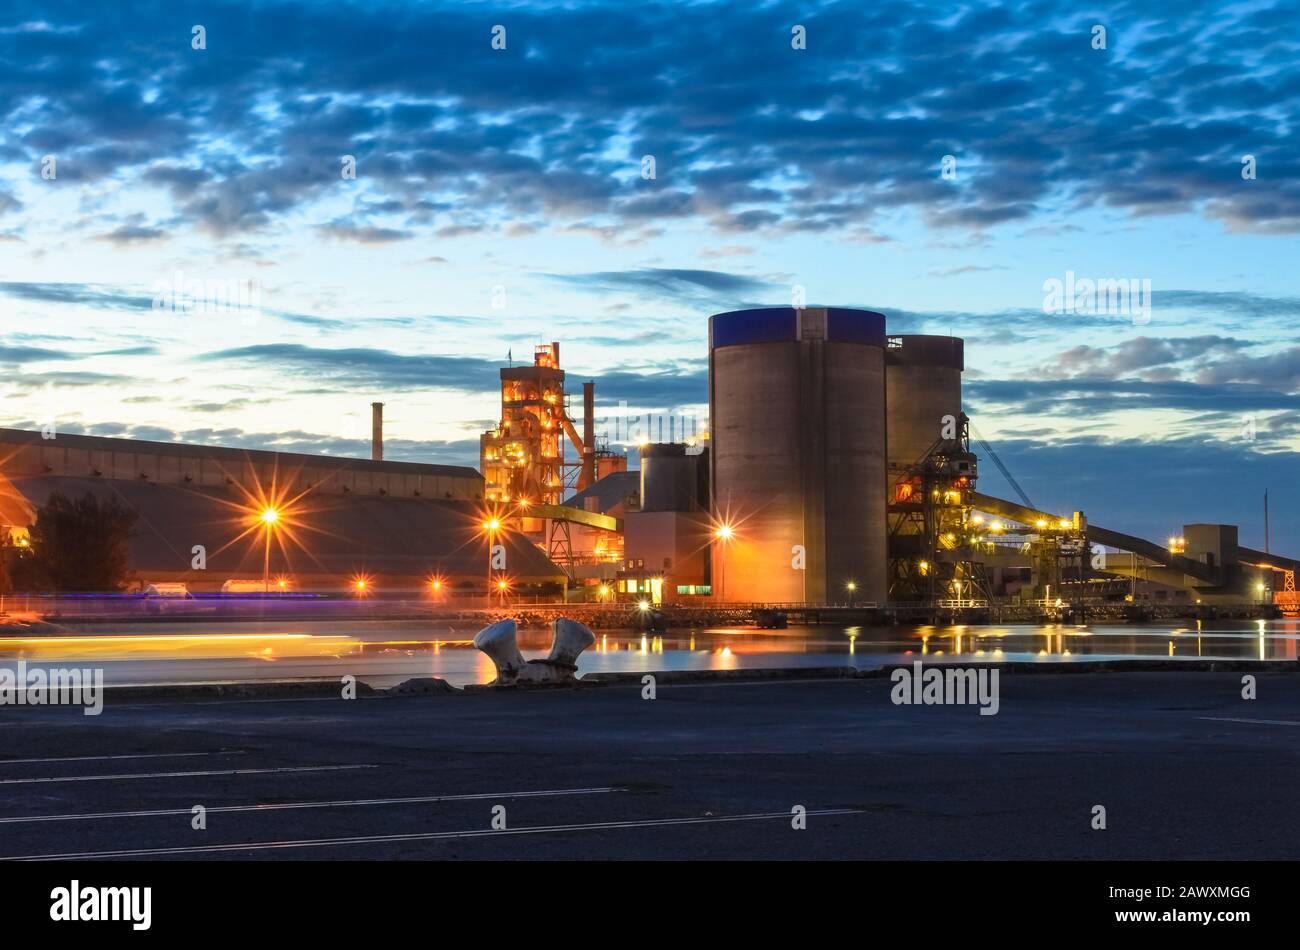 Industrial area of Port Adelaide at night, South Australia. Long exposure settings Stock Photo